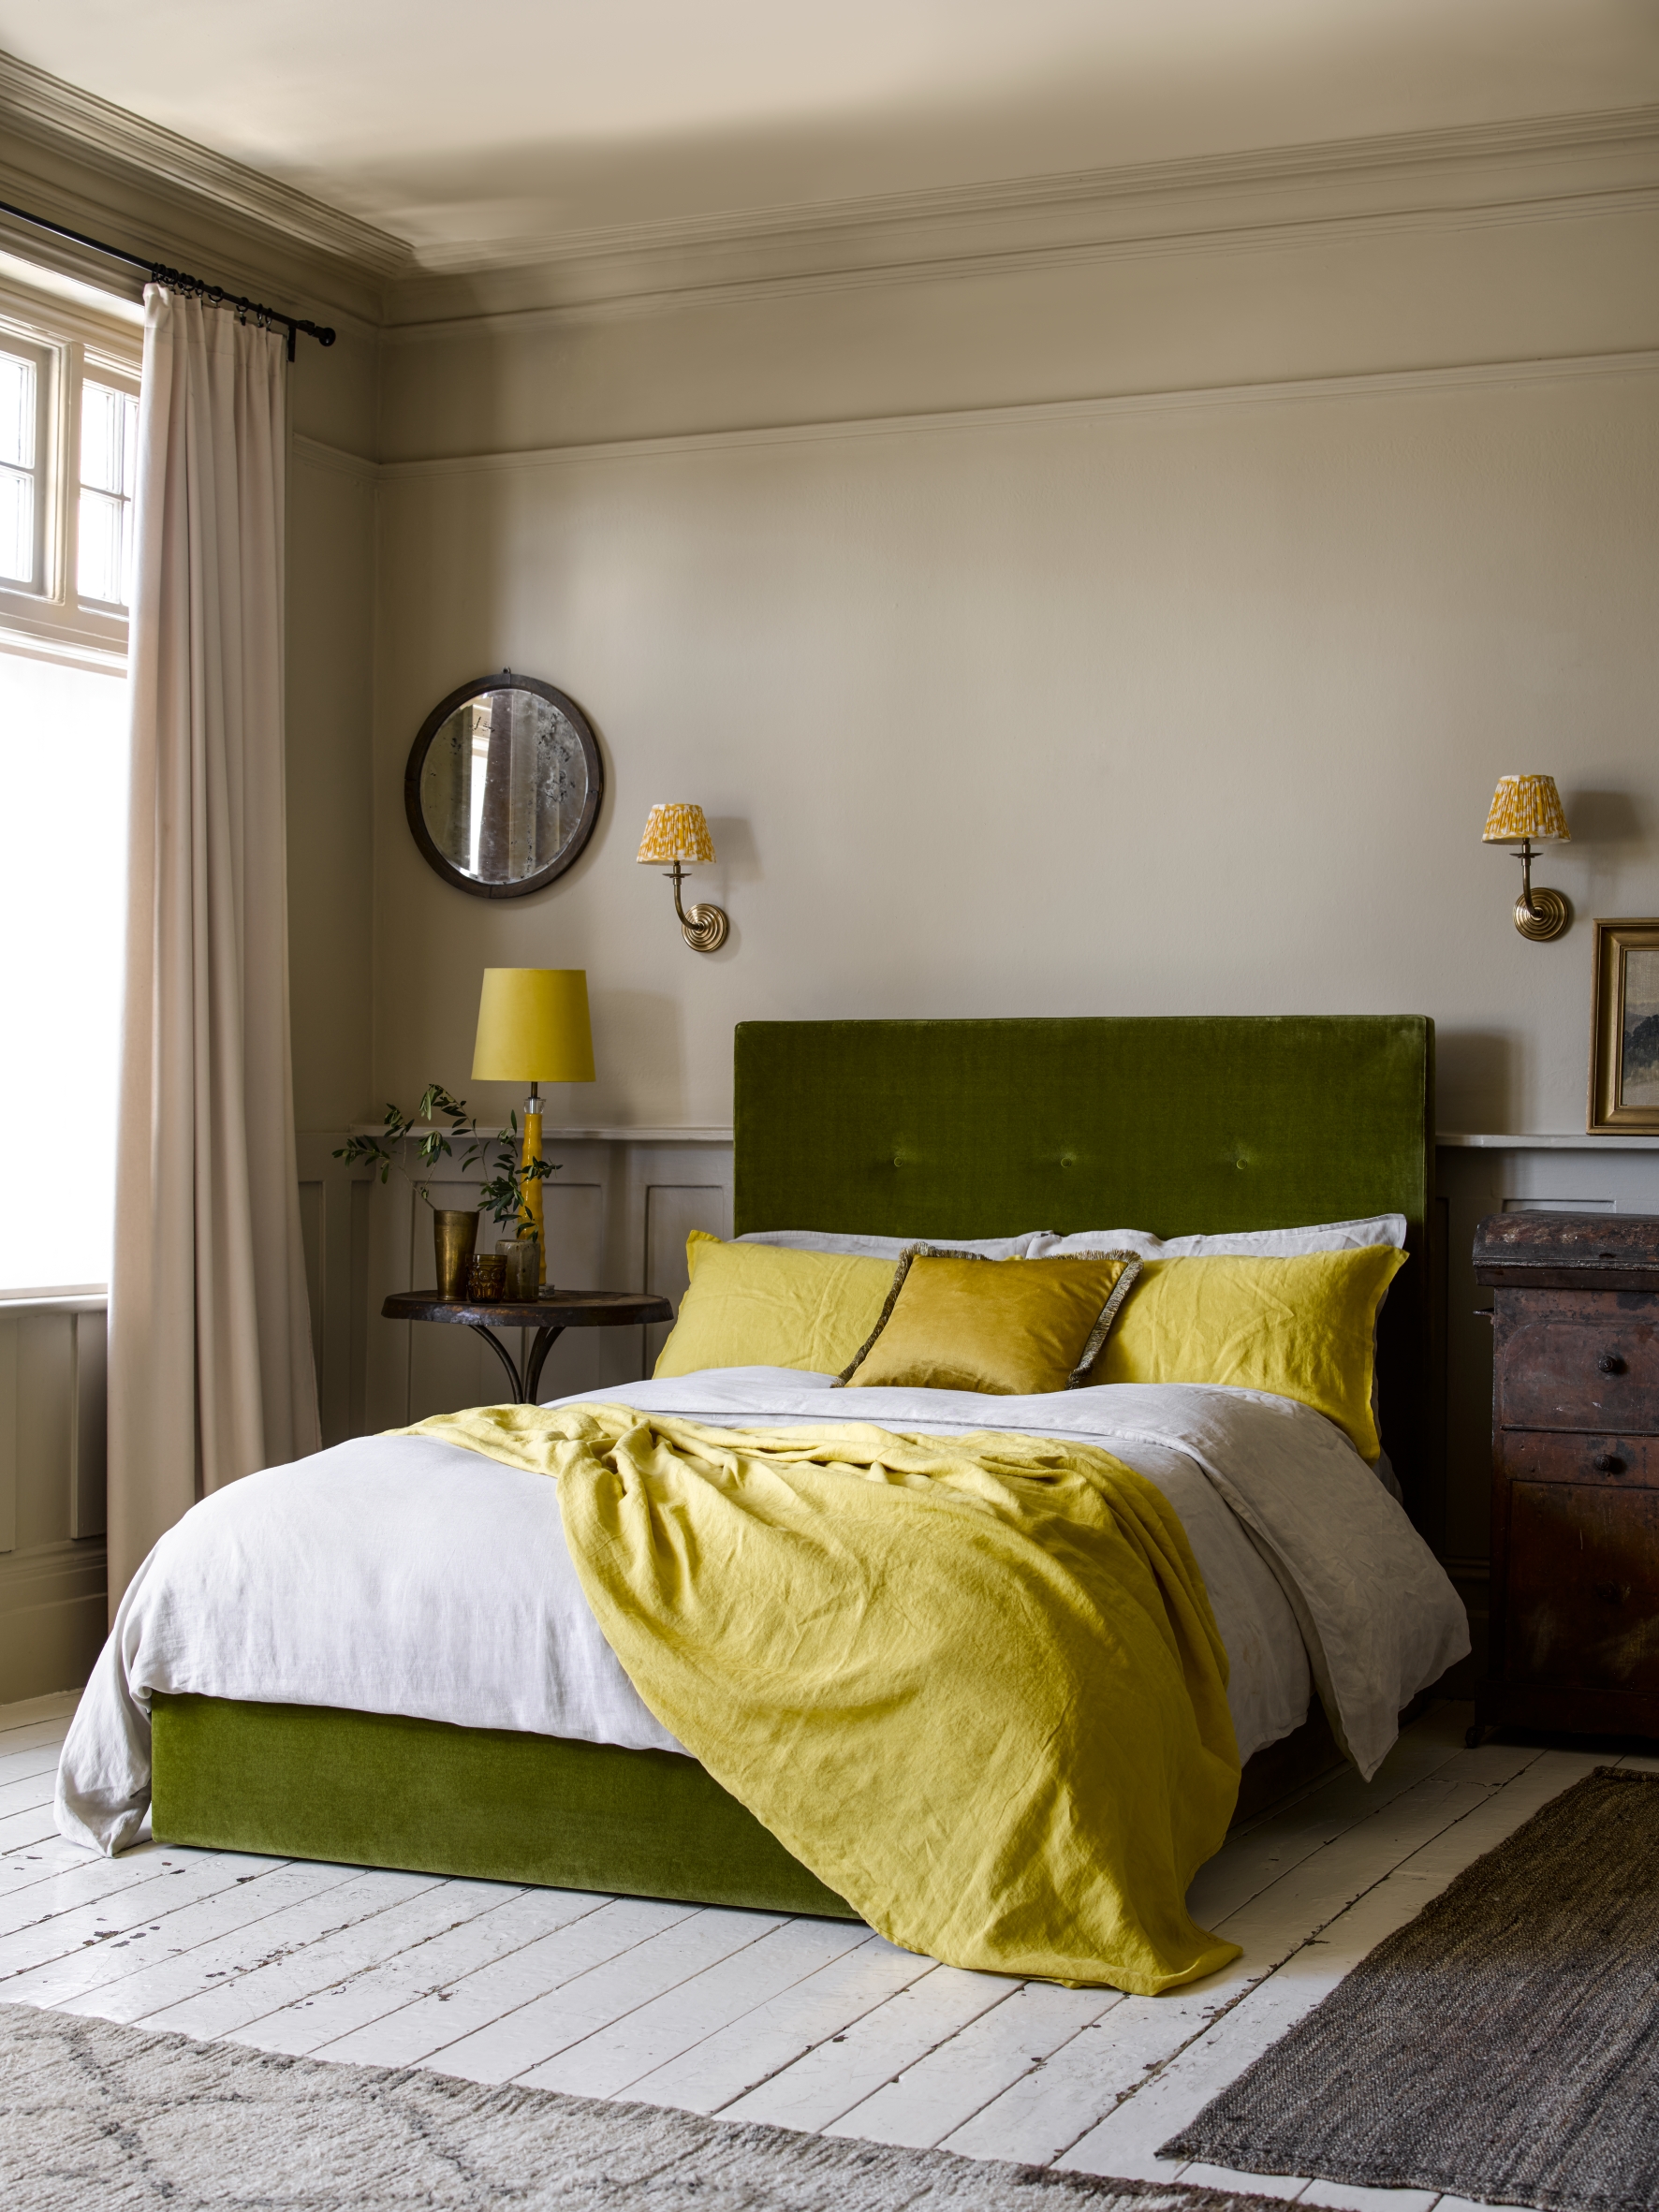 The best bedroom colors in a neutral beige scheme, with a green velvet upholstered bed, white floorboards and bright citrus yellow lighting, pillows and throw.